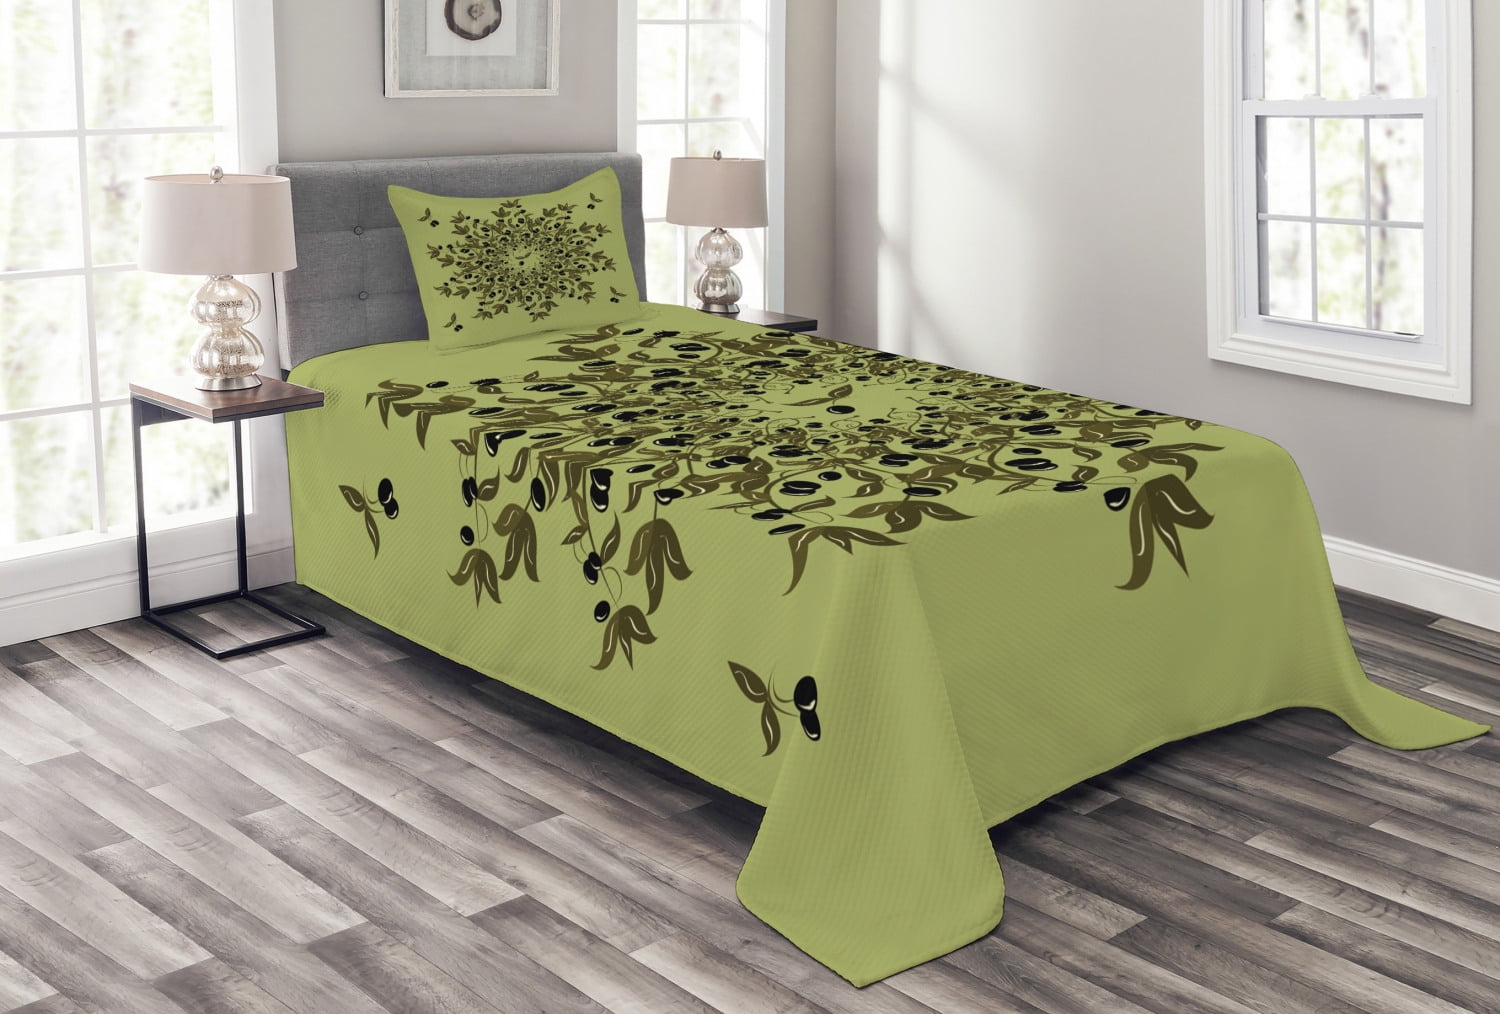 Details about   Camouflage Quilted Bedspread & Pillow Shams Set Green Forest Motif Print 